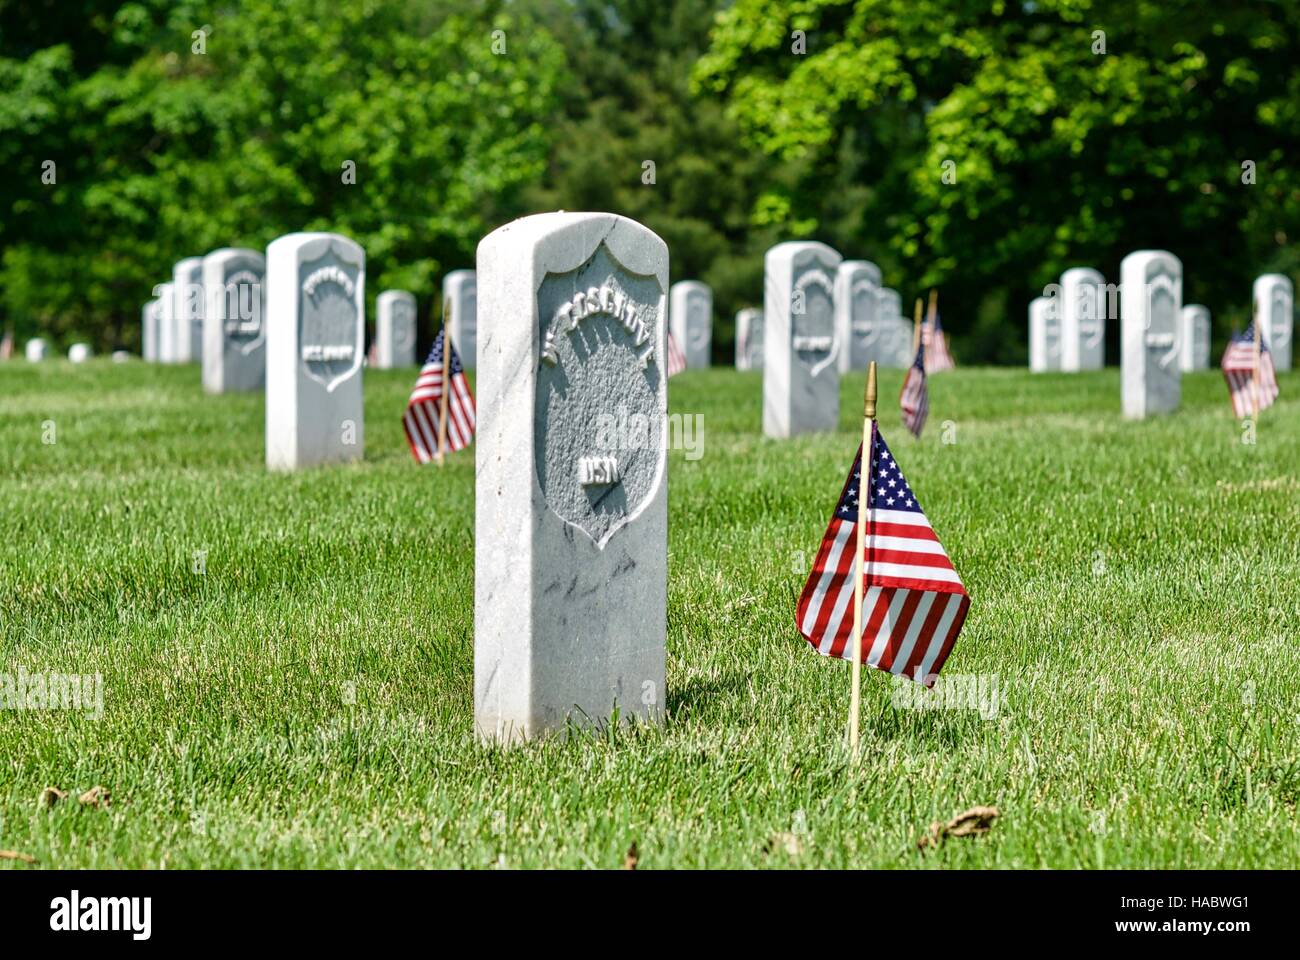 Gravestones with American flags at Arlington National Cemetery in Fort Myer, Arlington, Virginia, USA, on Memorial Day weekend. Stock Photo